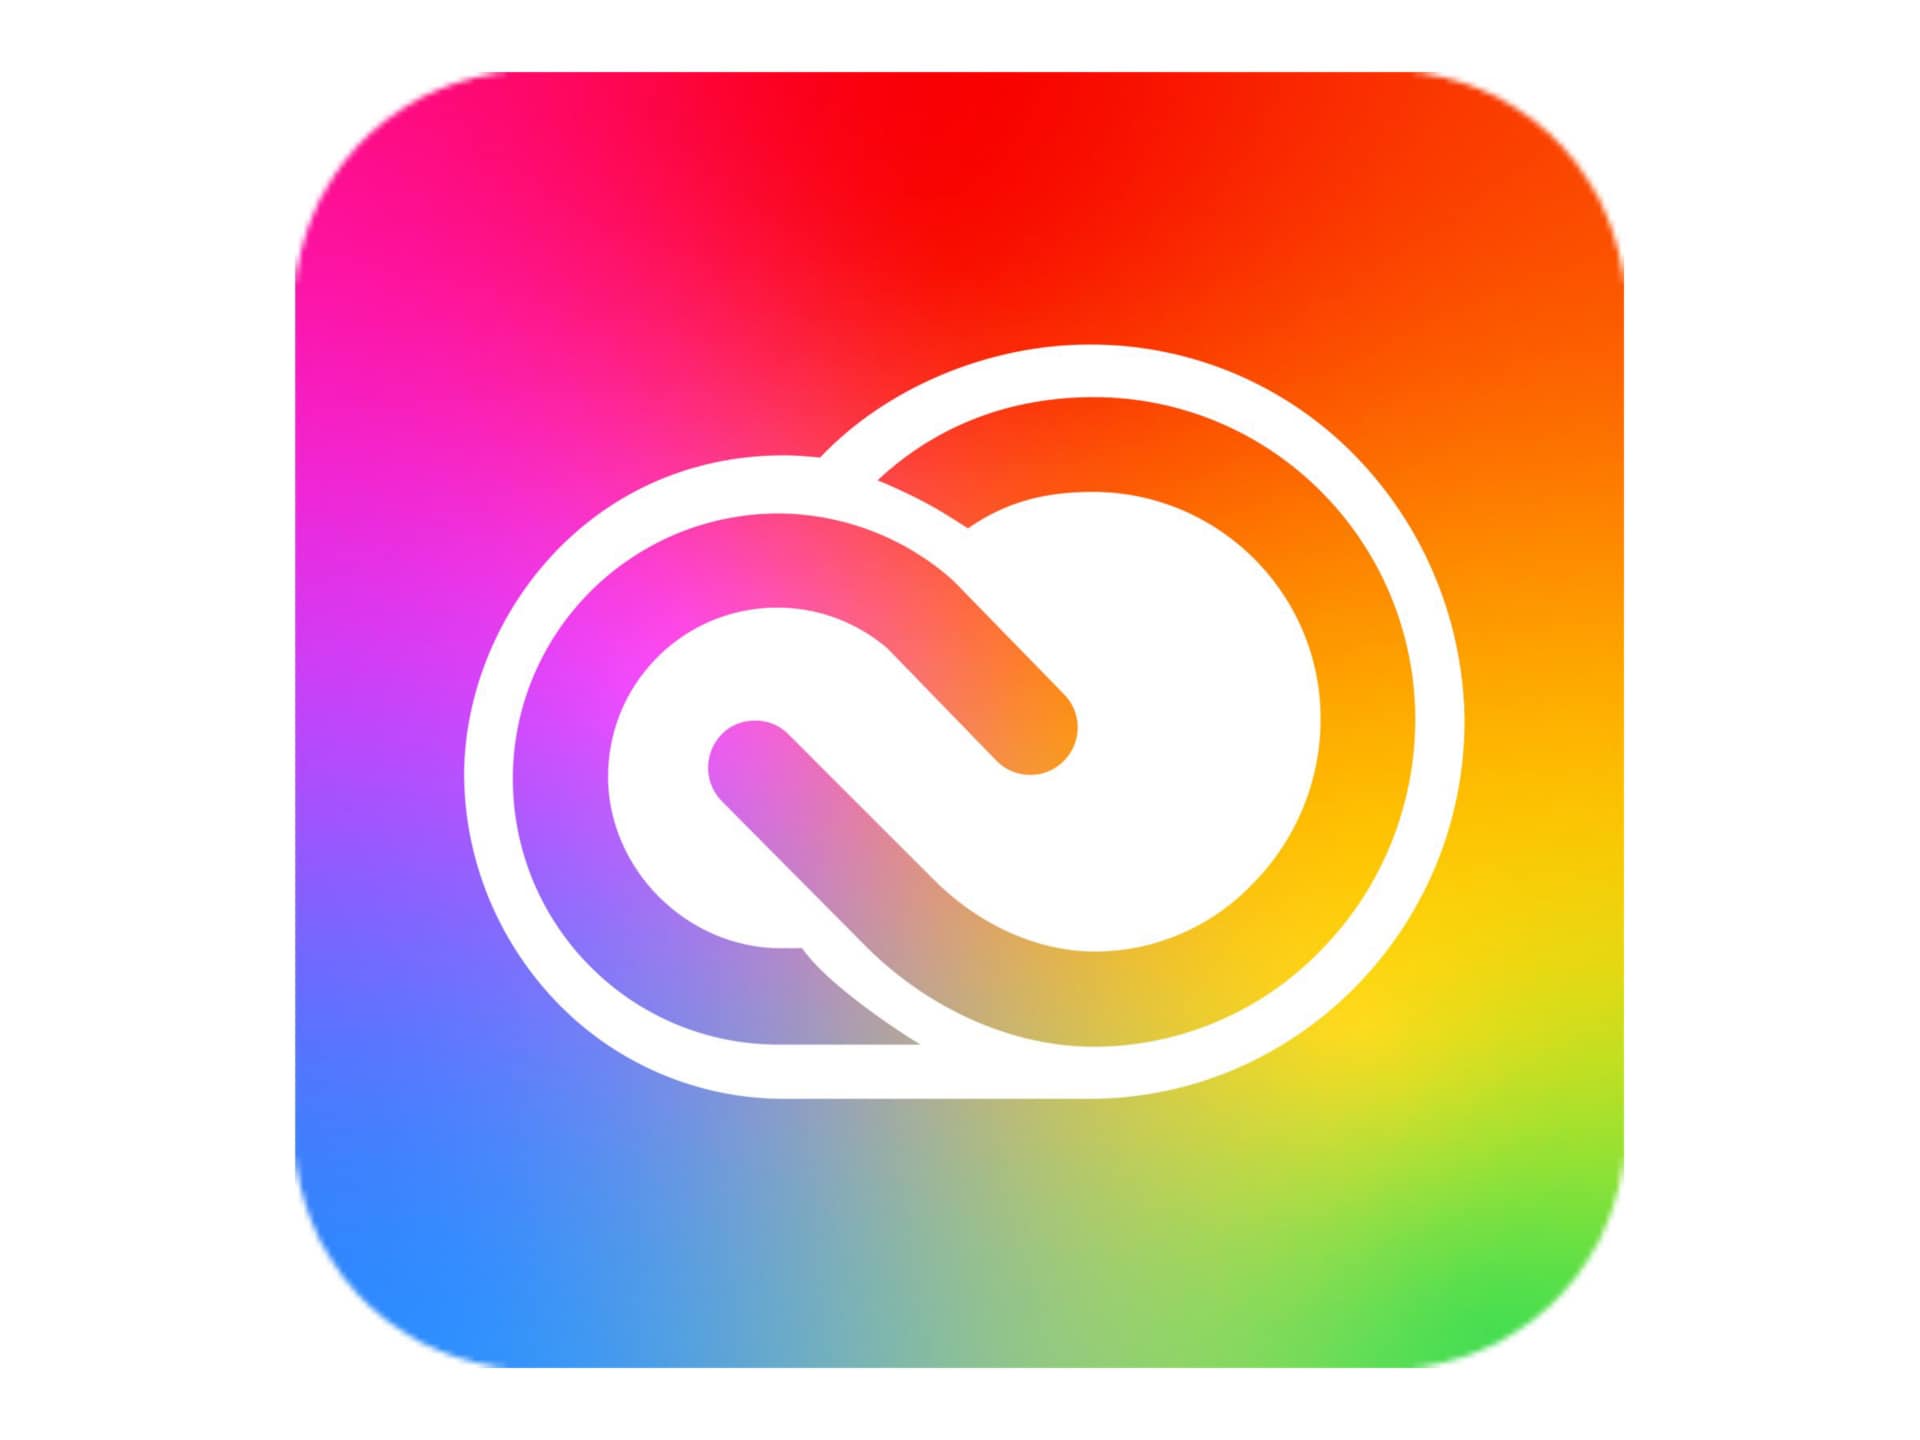 Adobe Creative Cloud for teams - Subscription New (2 years) - 10 assets, 1 named user - with Adobe Stock